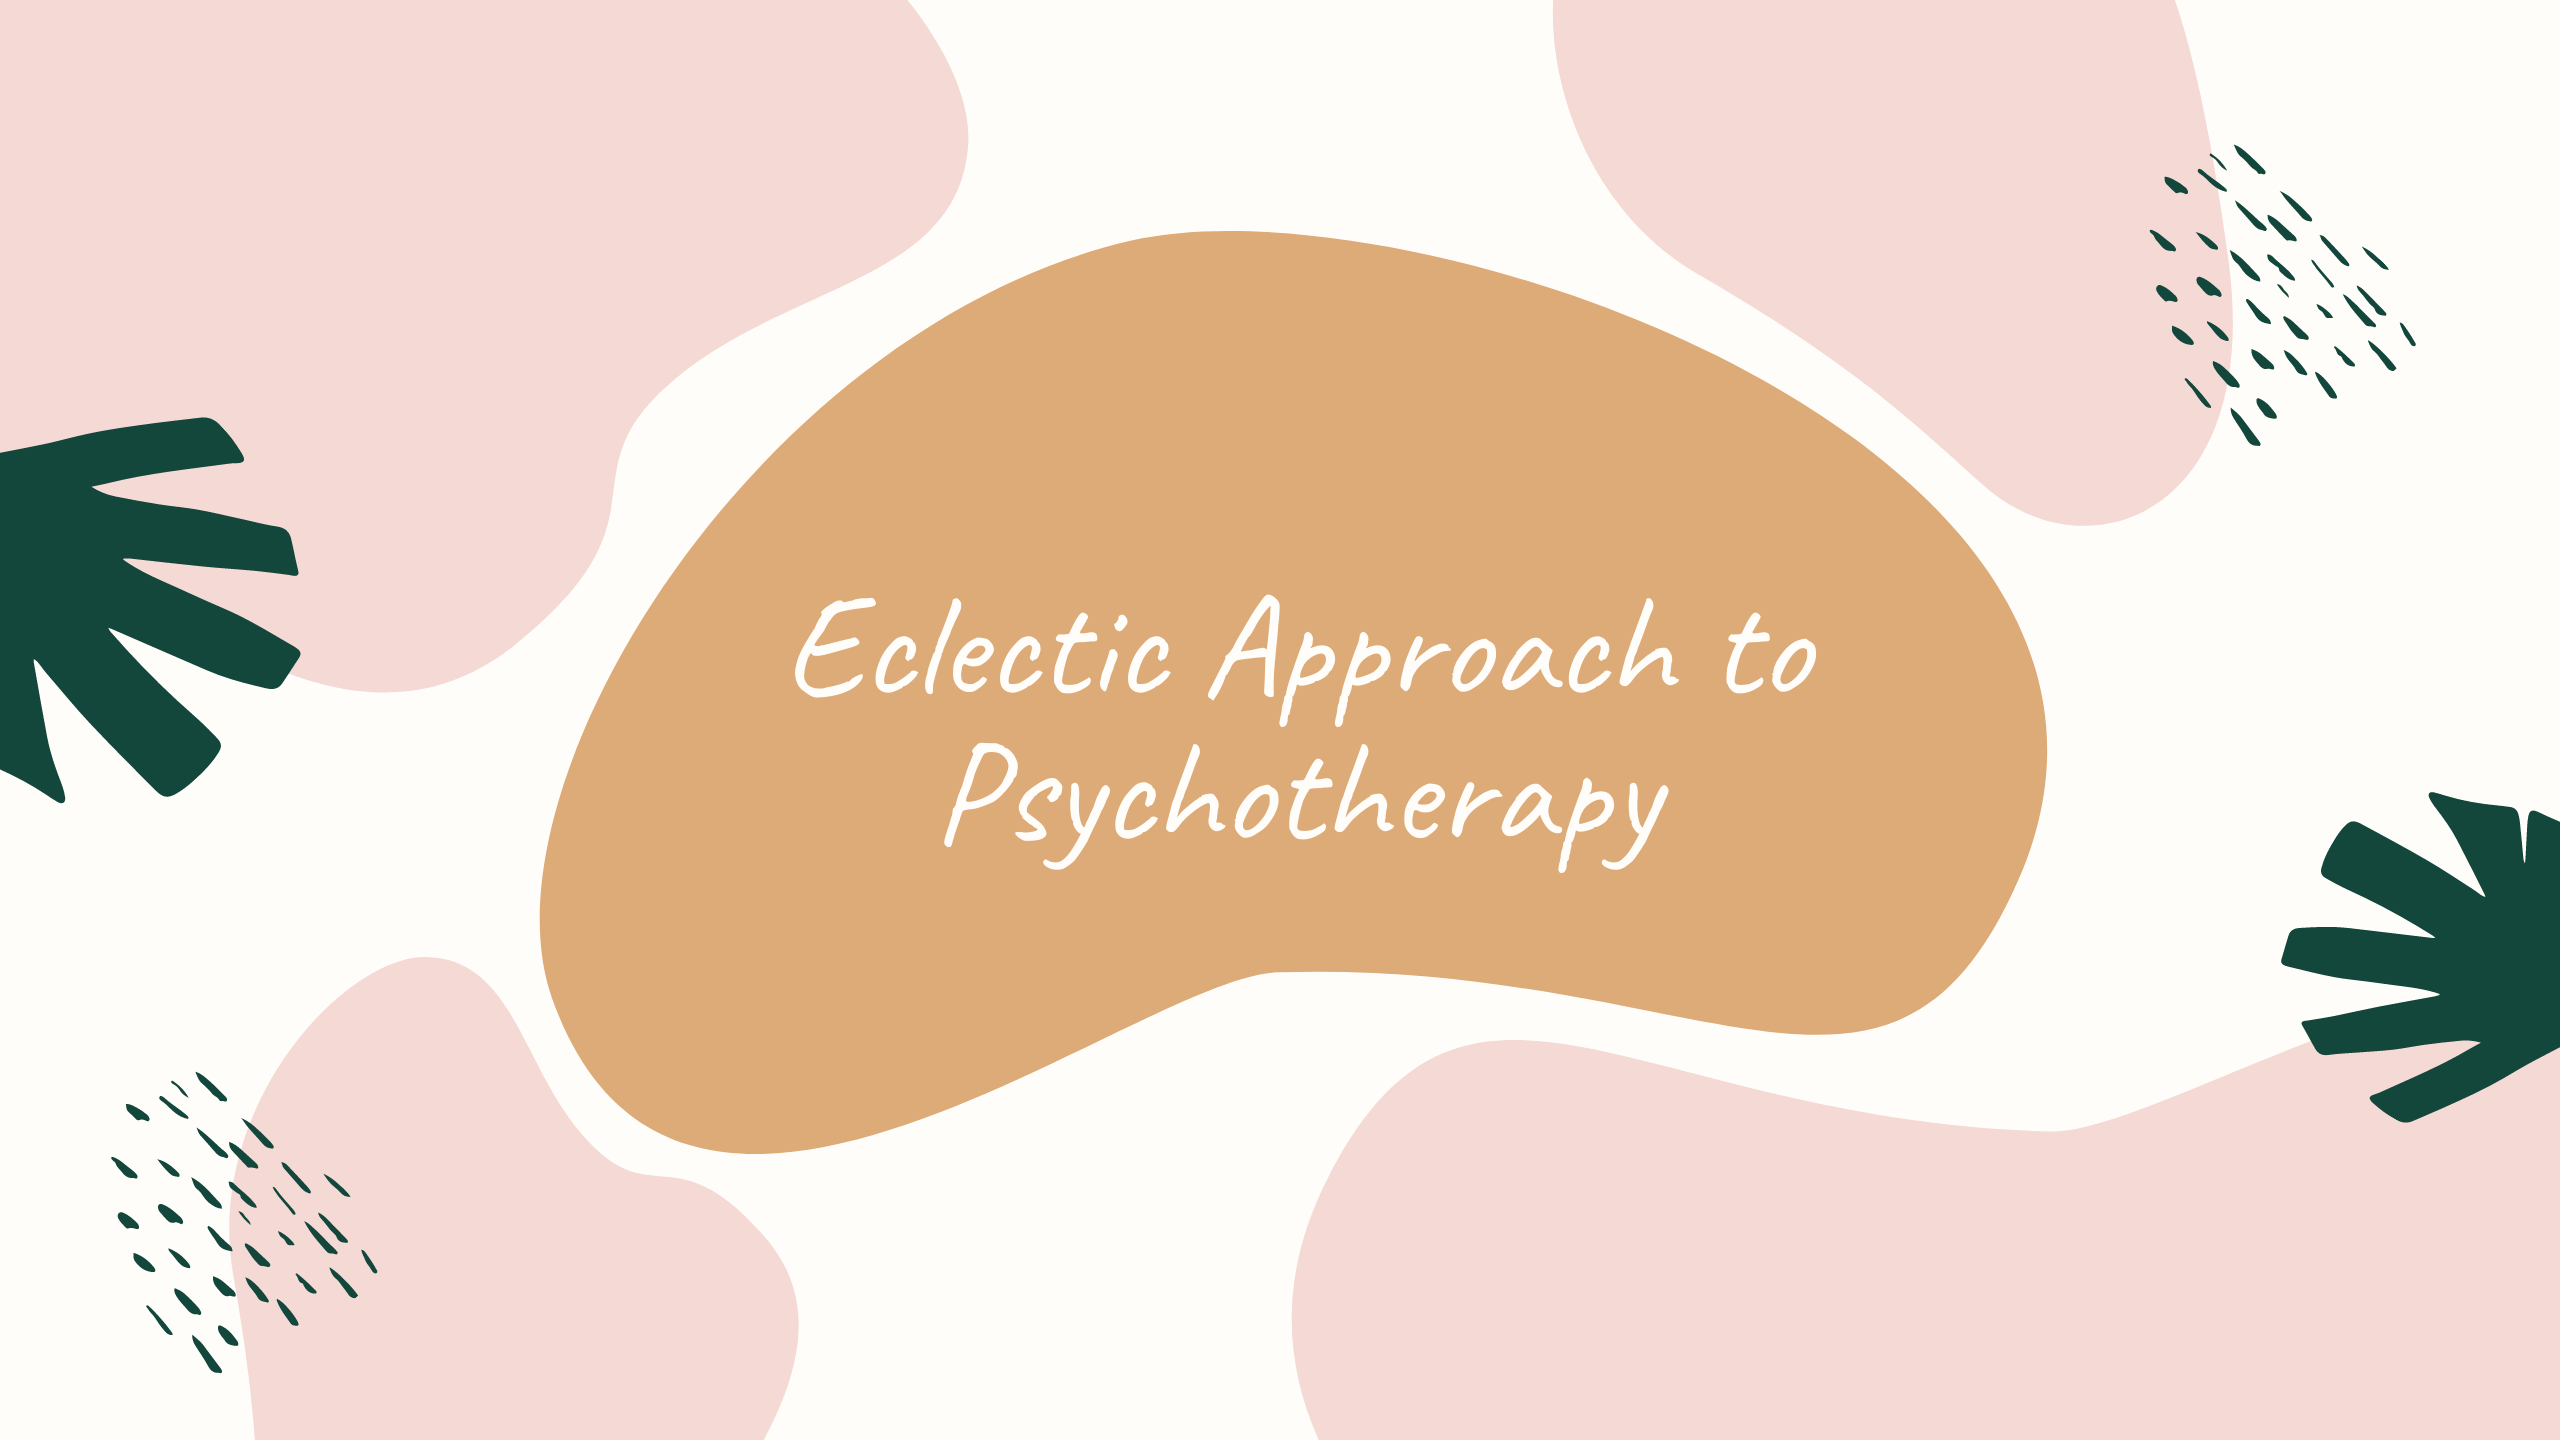 Online course in Eclectic Psychotherapy